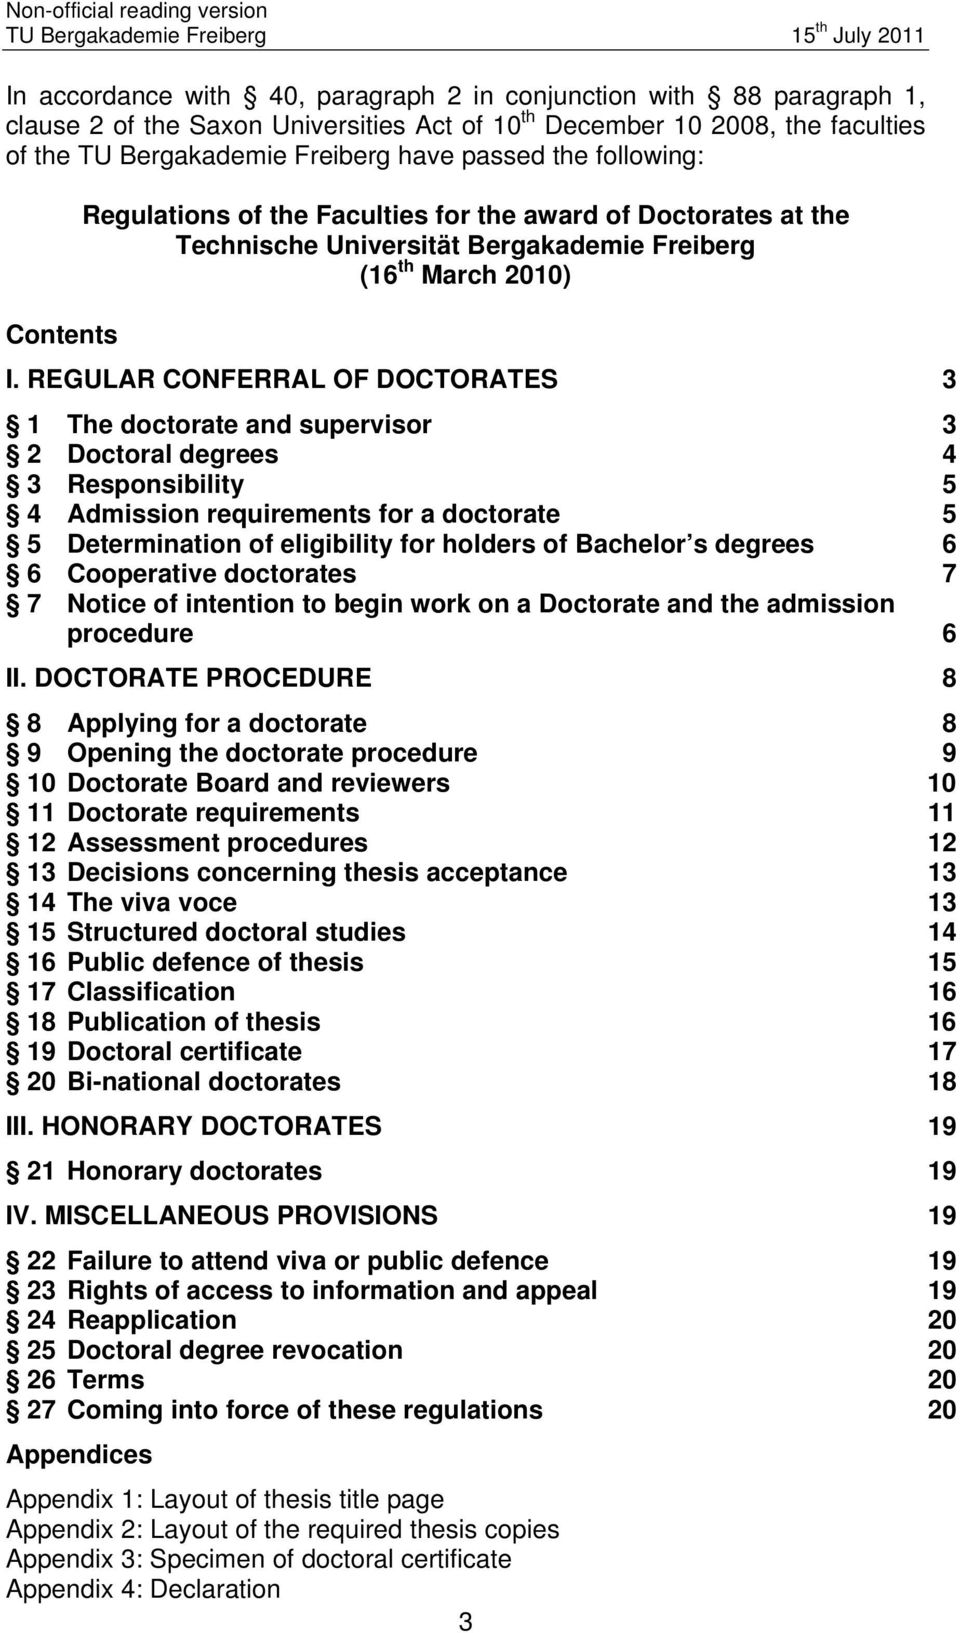 REGULAR CONFERRAL OF DOCTORATES 3 1 The doctorate and supervisor 3 2 Doctoral degrees 4 3 Responsibility 5 4 Admission requirements for a doctorate 5 5 Determination of eligibility for holders of